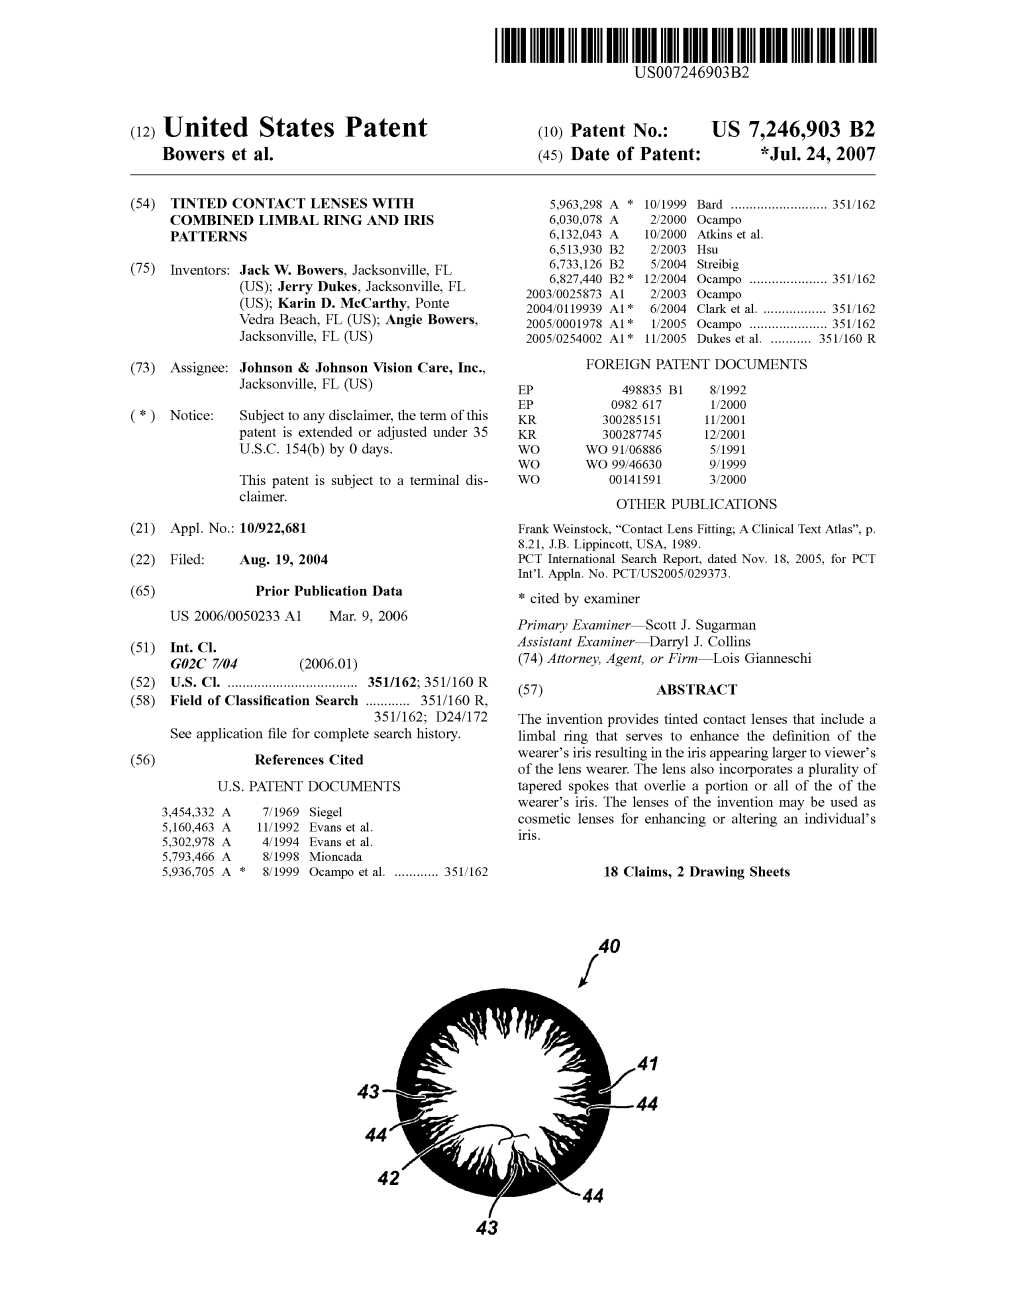 United States Patent (10) Patent N0.: US 7,246,903 B2 Bowers Et A]